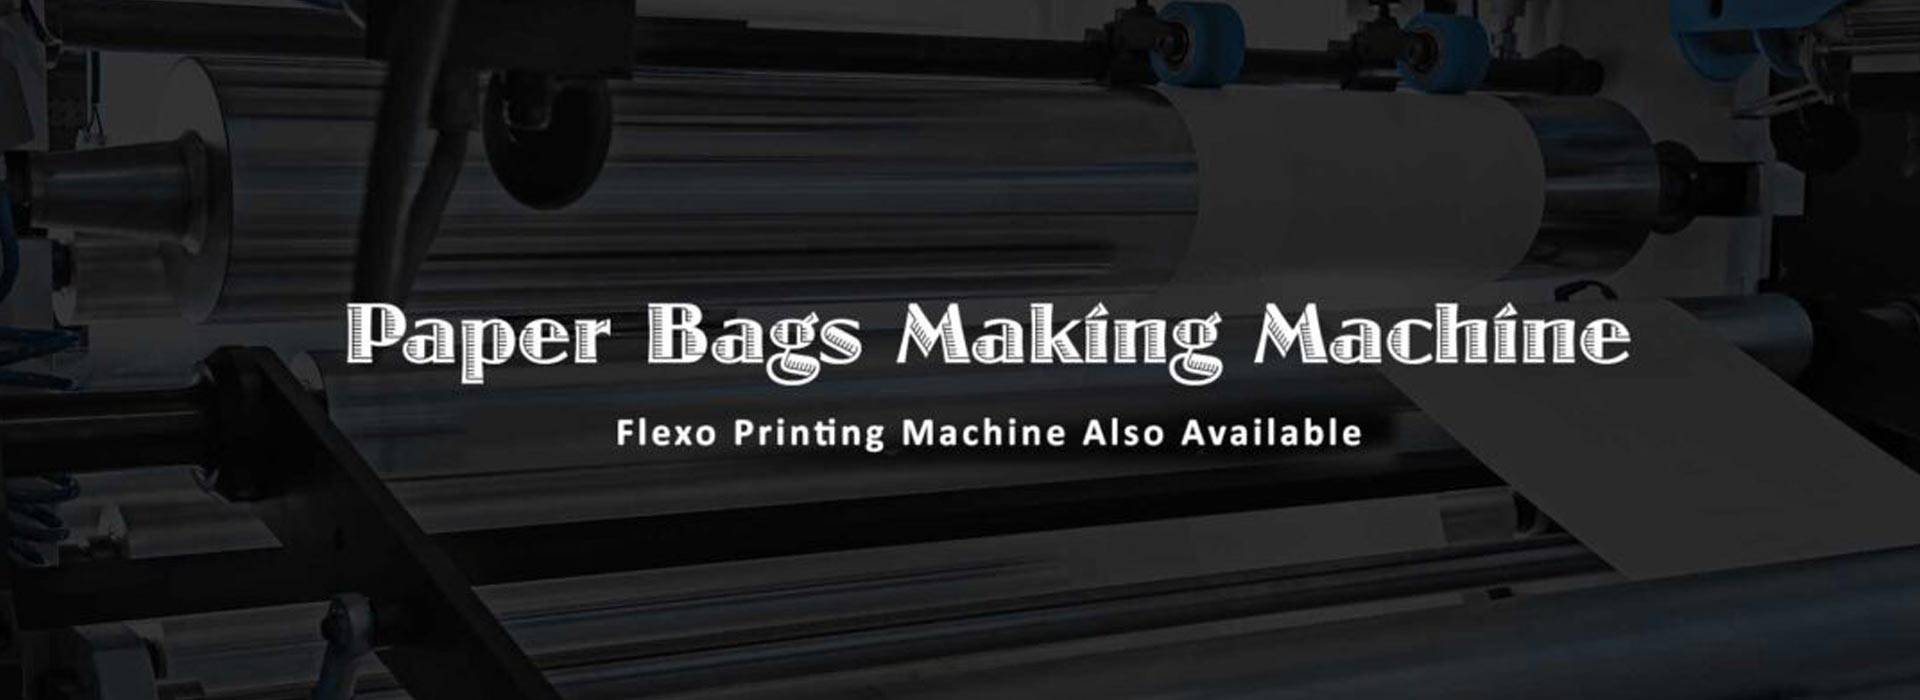 flexo printing machine also available